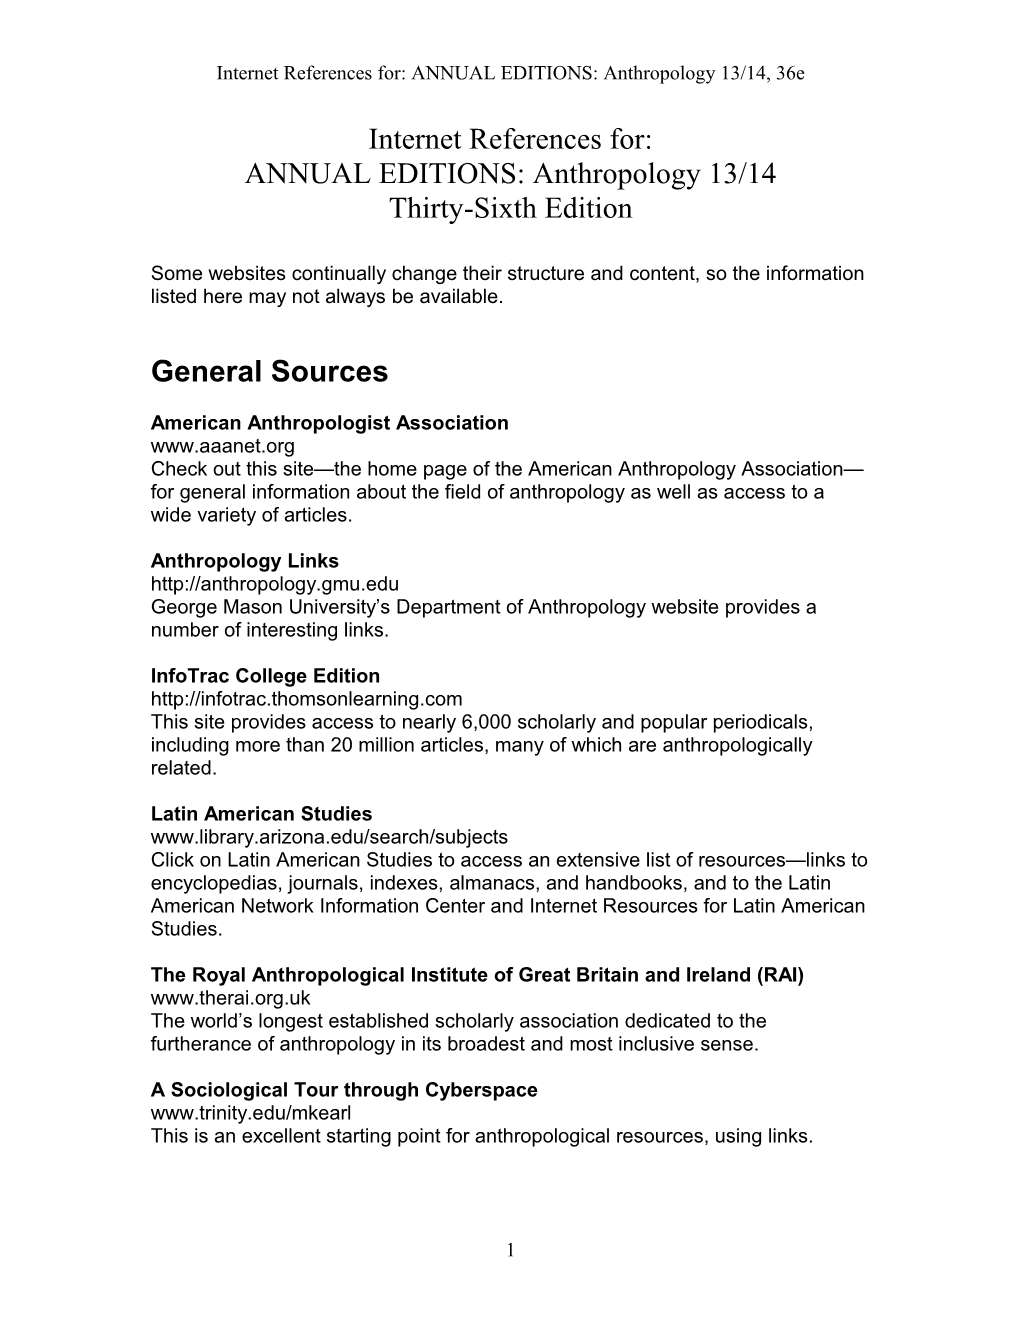 Internet References For: ANNUAL EDITIONS: Anthropology 13/14, 36E